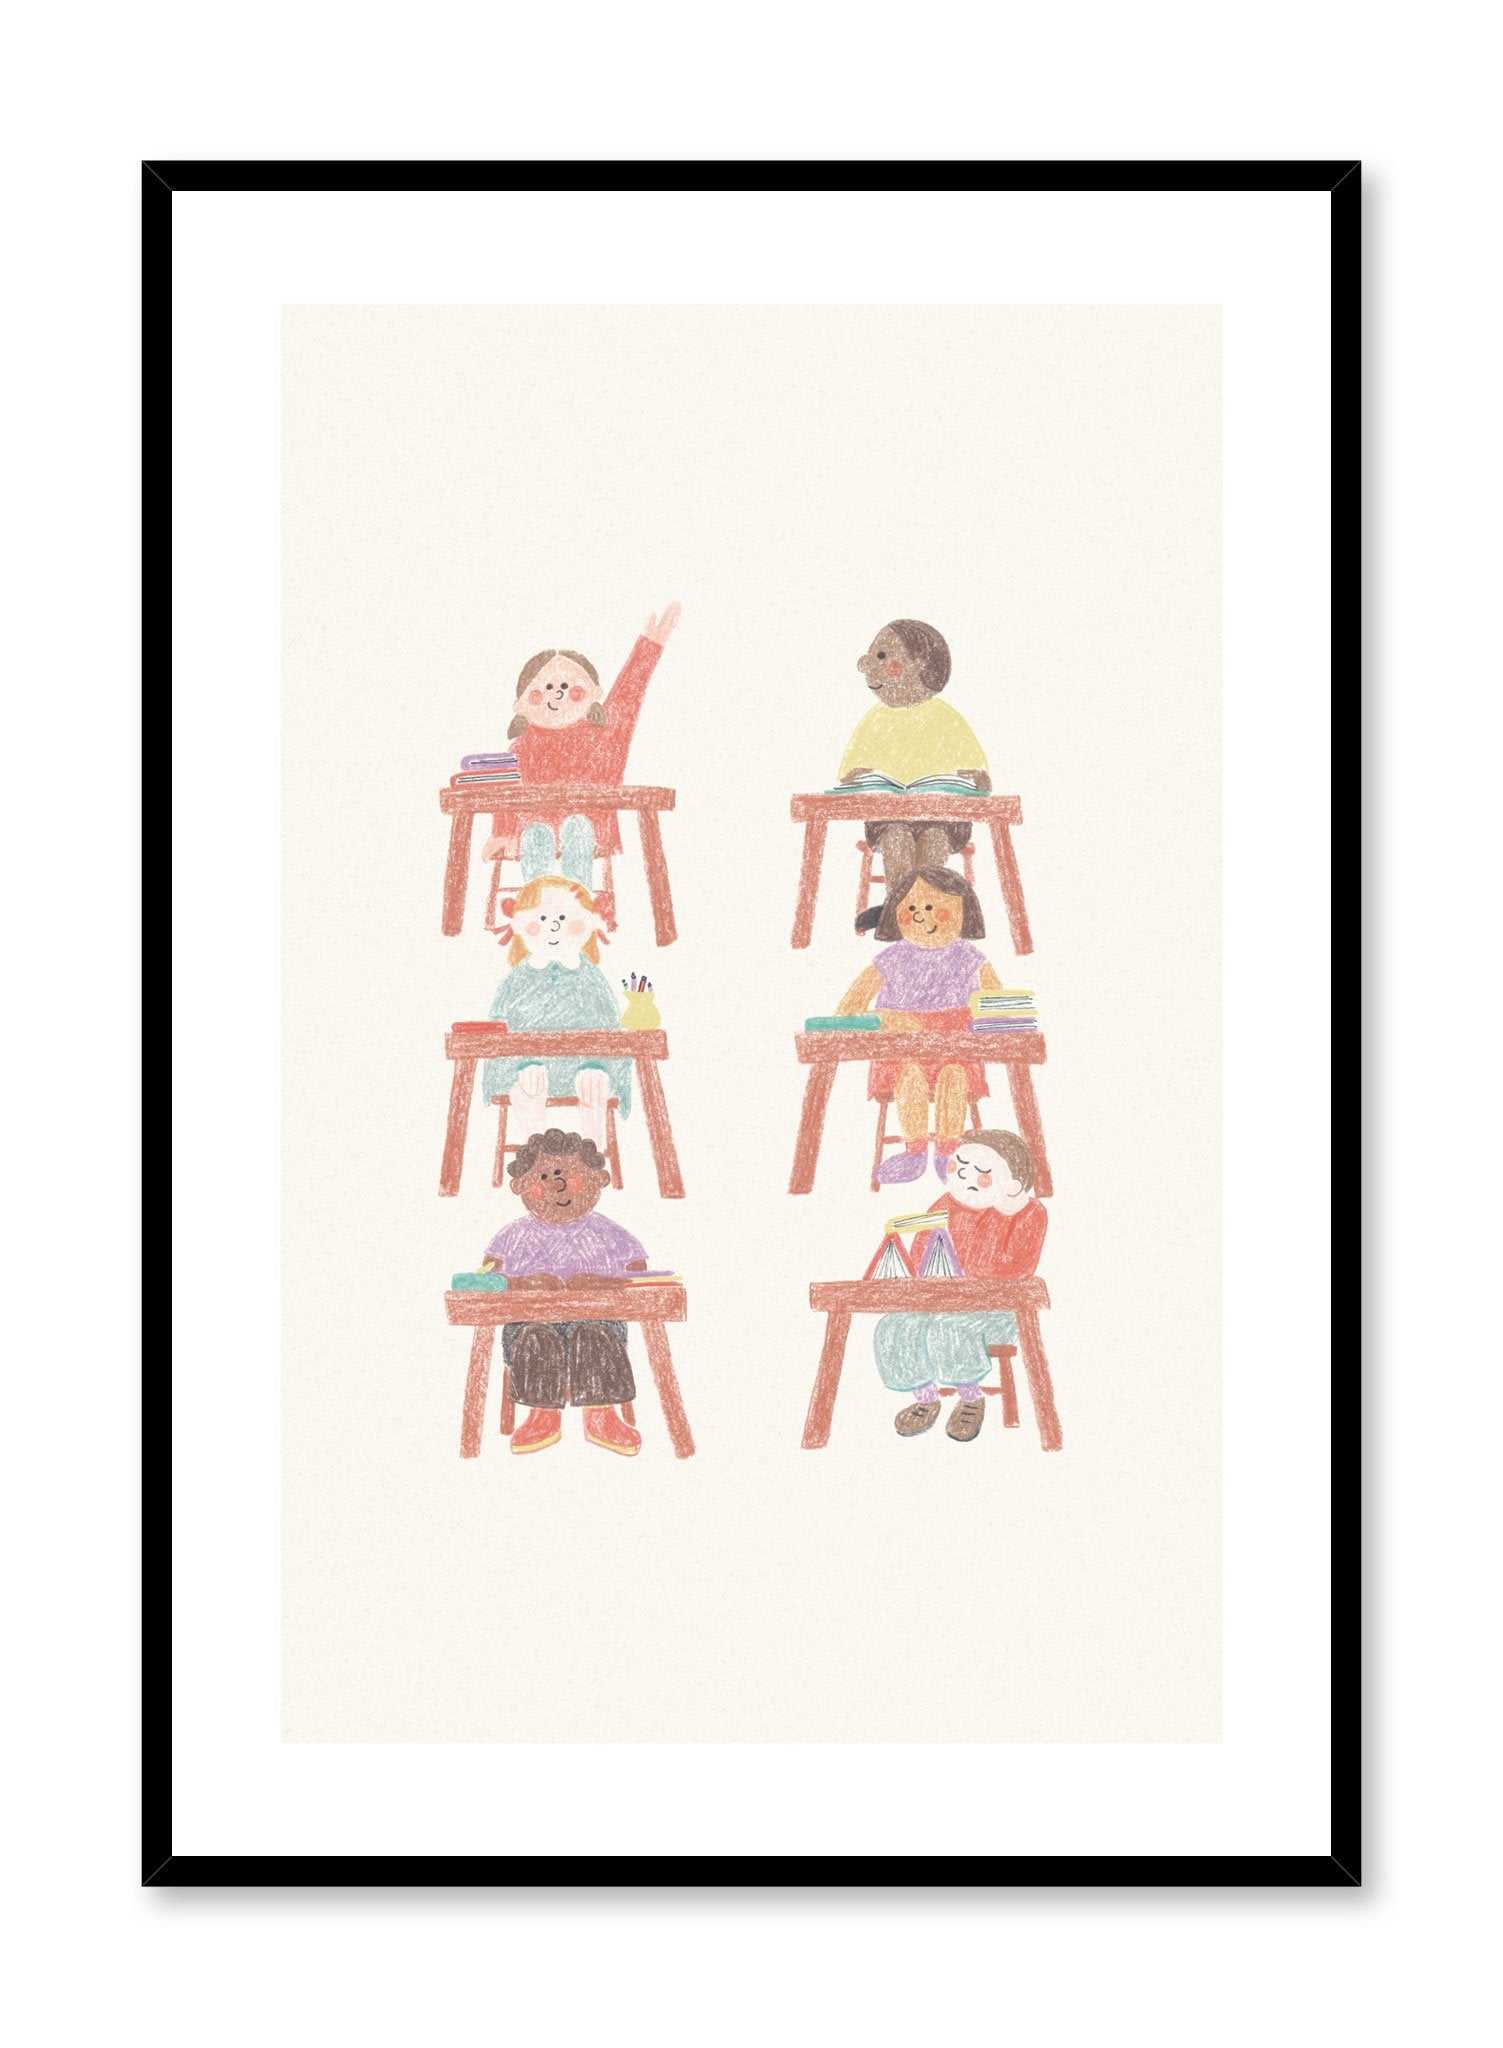 The Classroom is a minimalist illustration by Opposite Wall of six different style of students sitting at their desks.